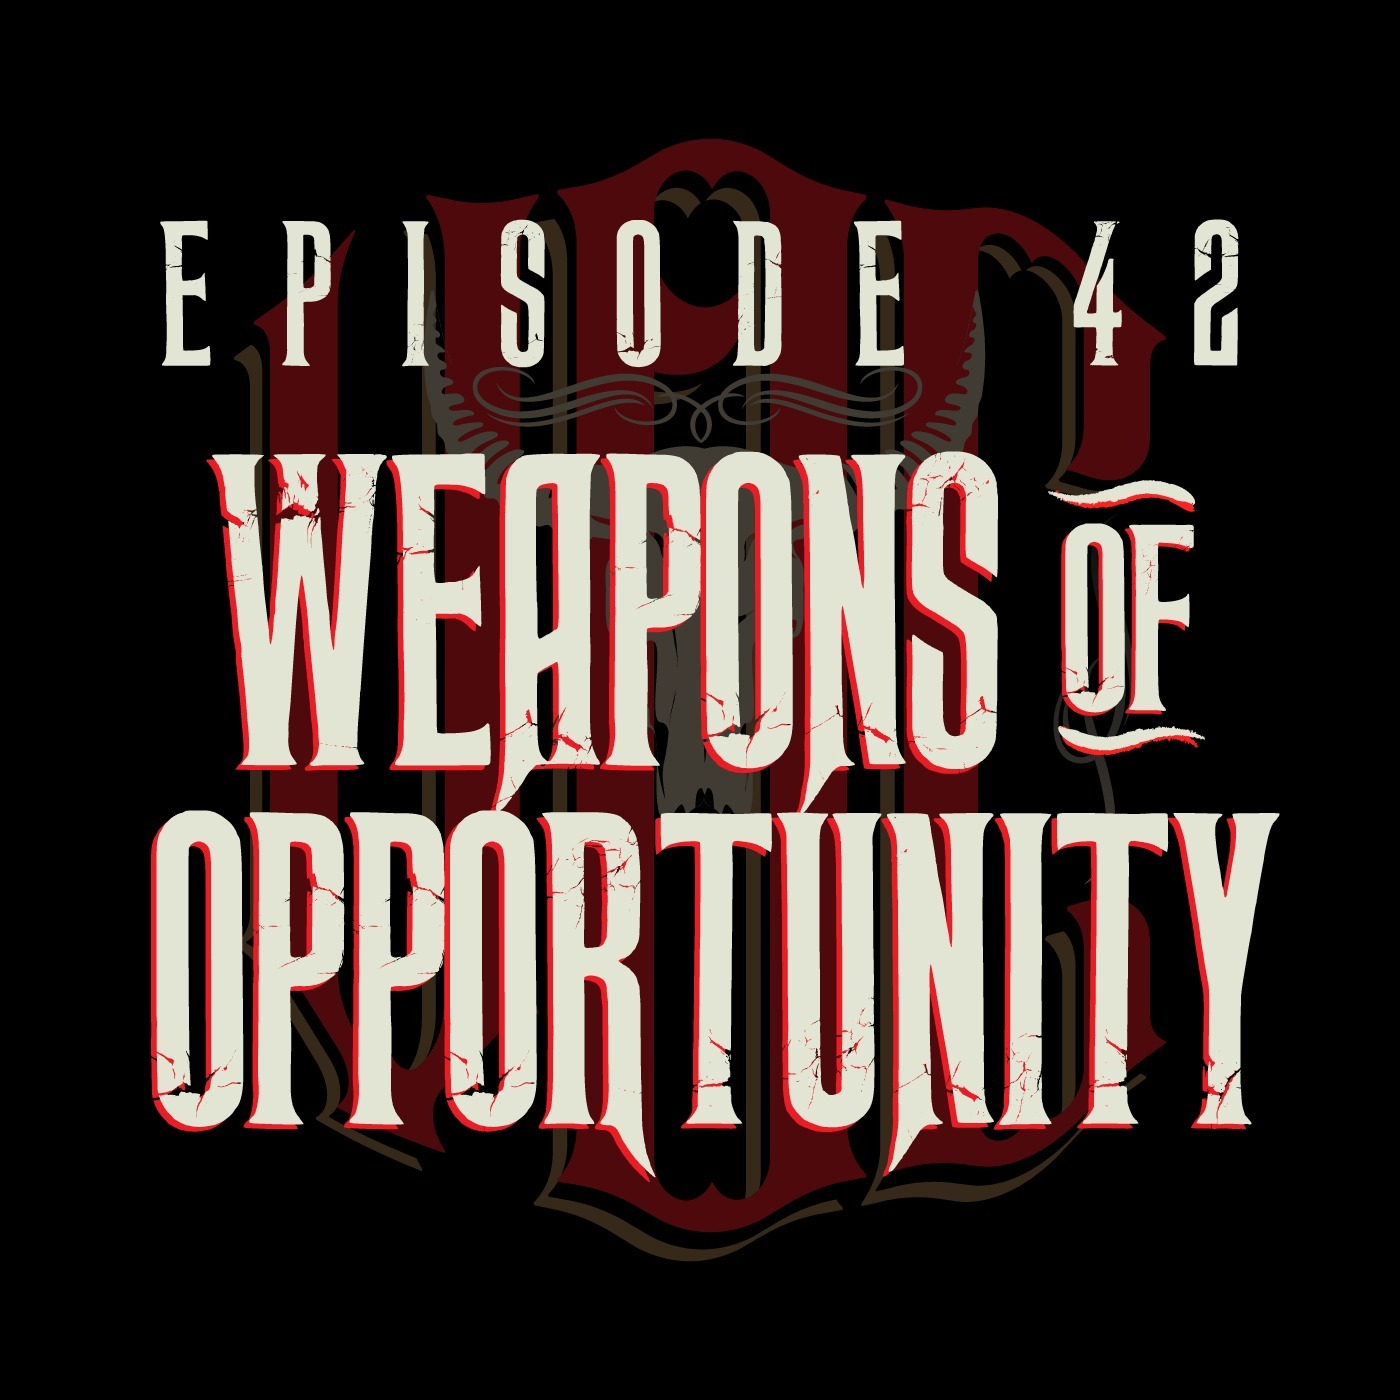 VOC EPISODE 42:  WEAPONS OF OPPORTUNITY